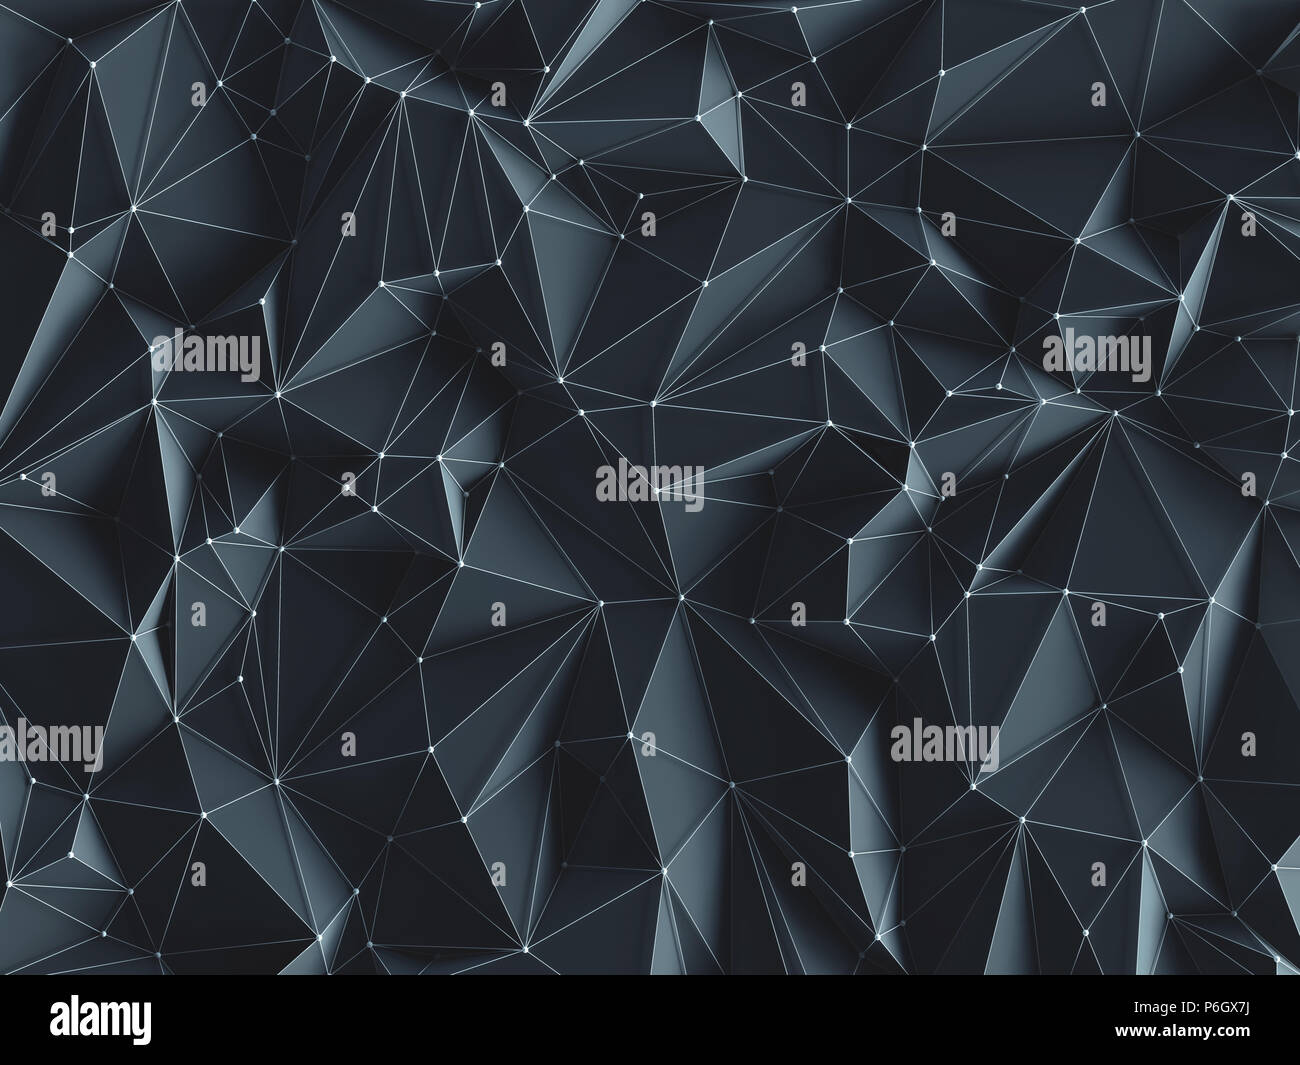 3D illustration. Abstract background image, connections in lines and geometric triangular shapes. Stock Photo